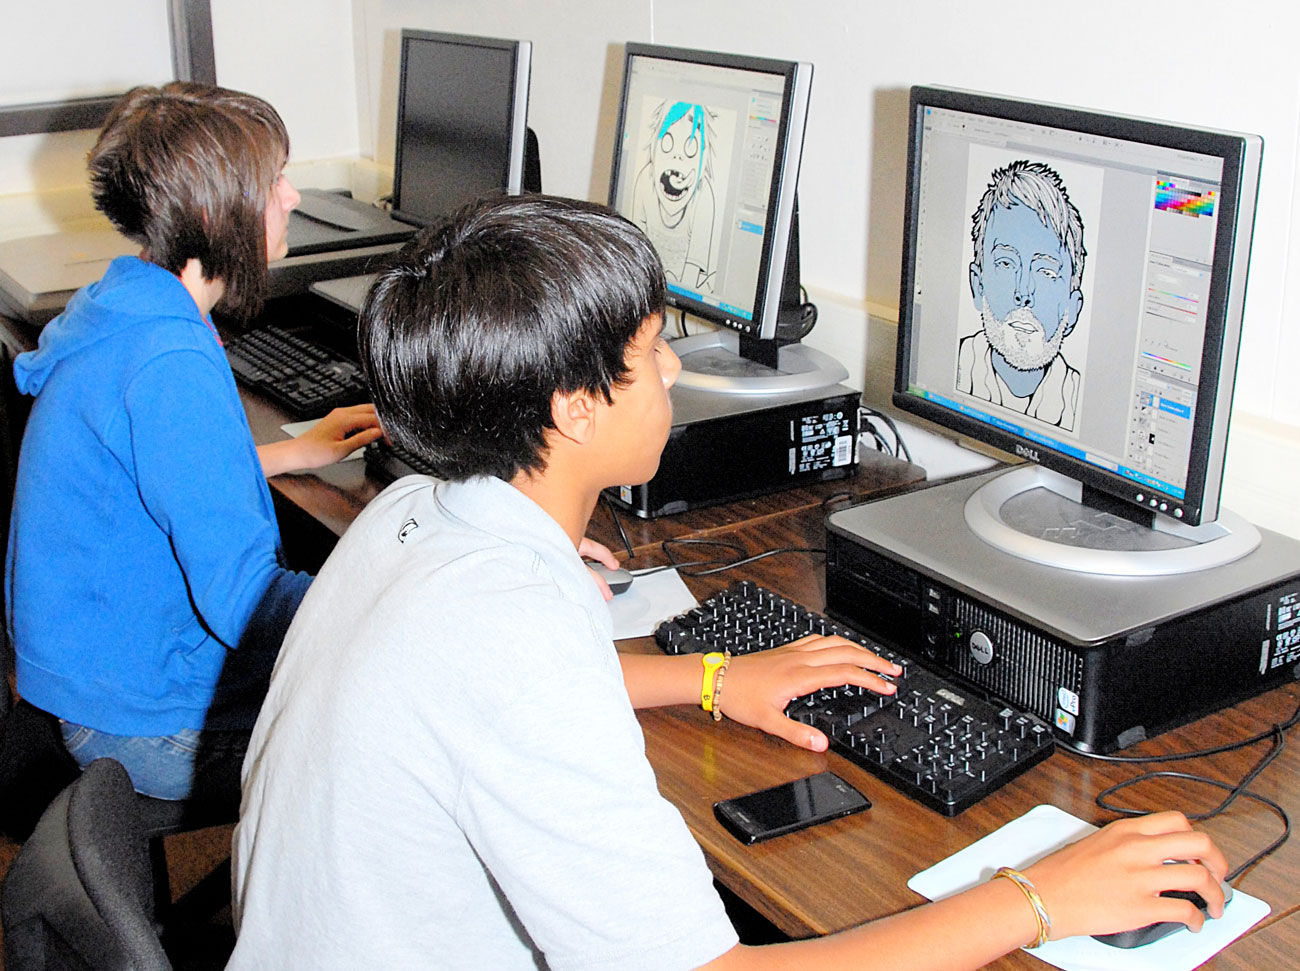 Graphic arts students work on computers